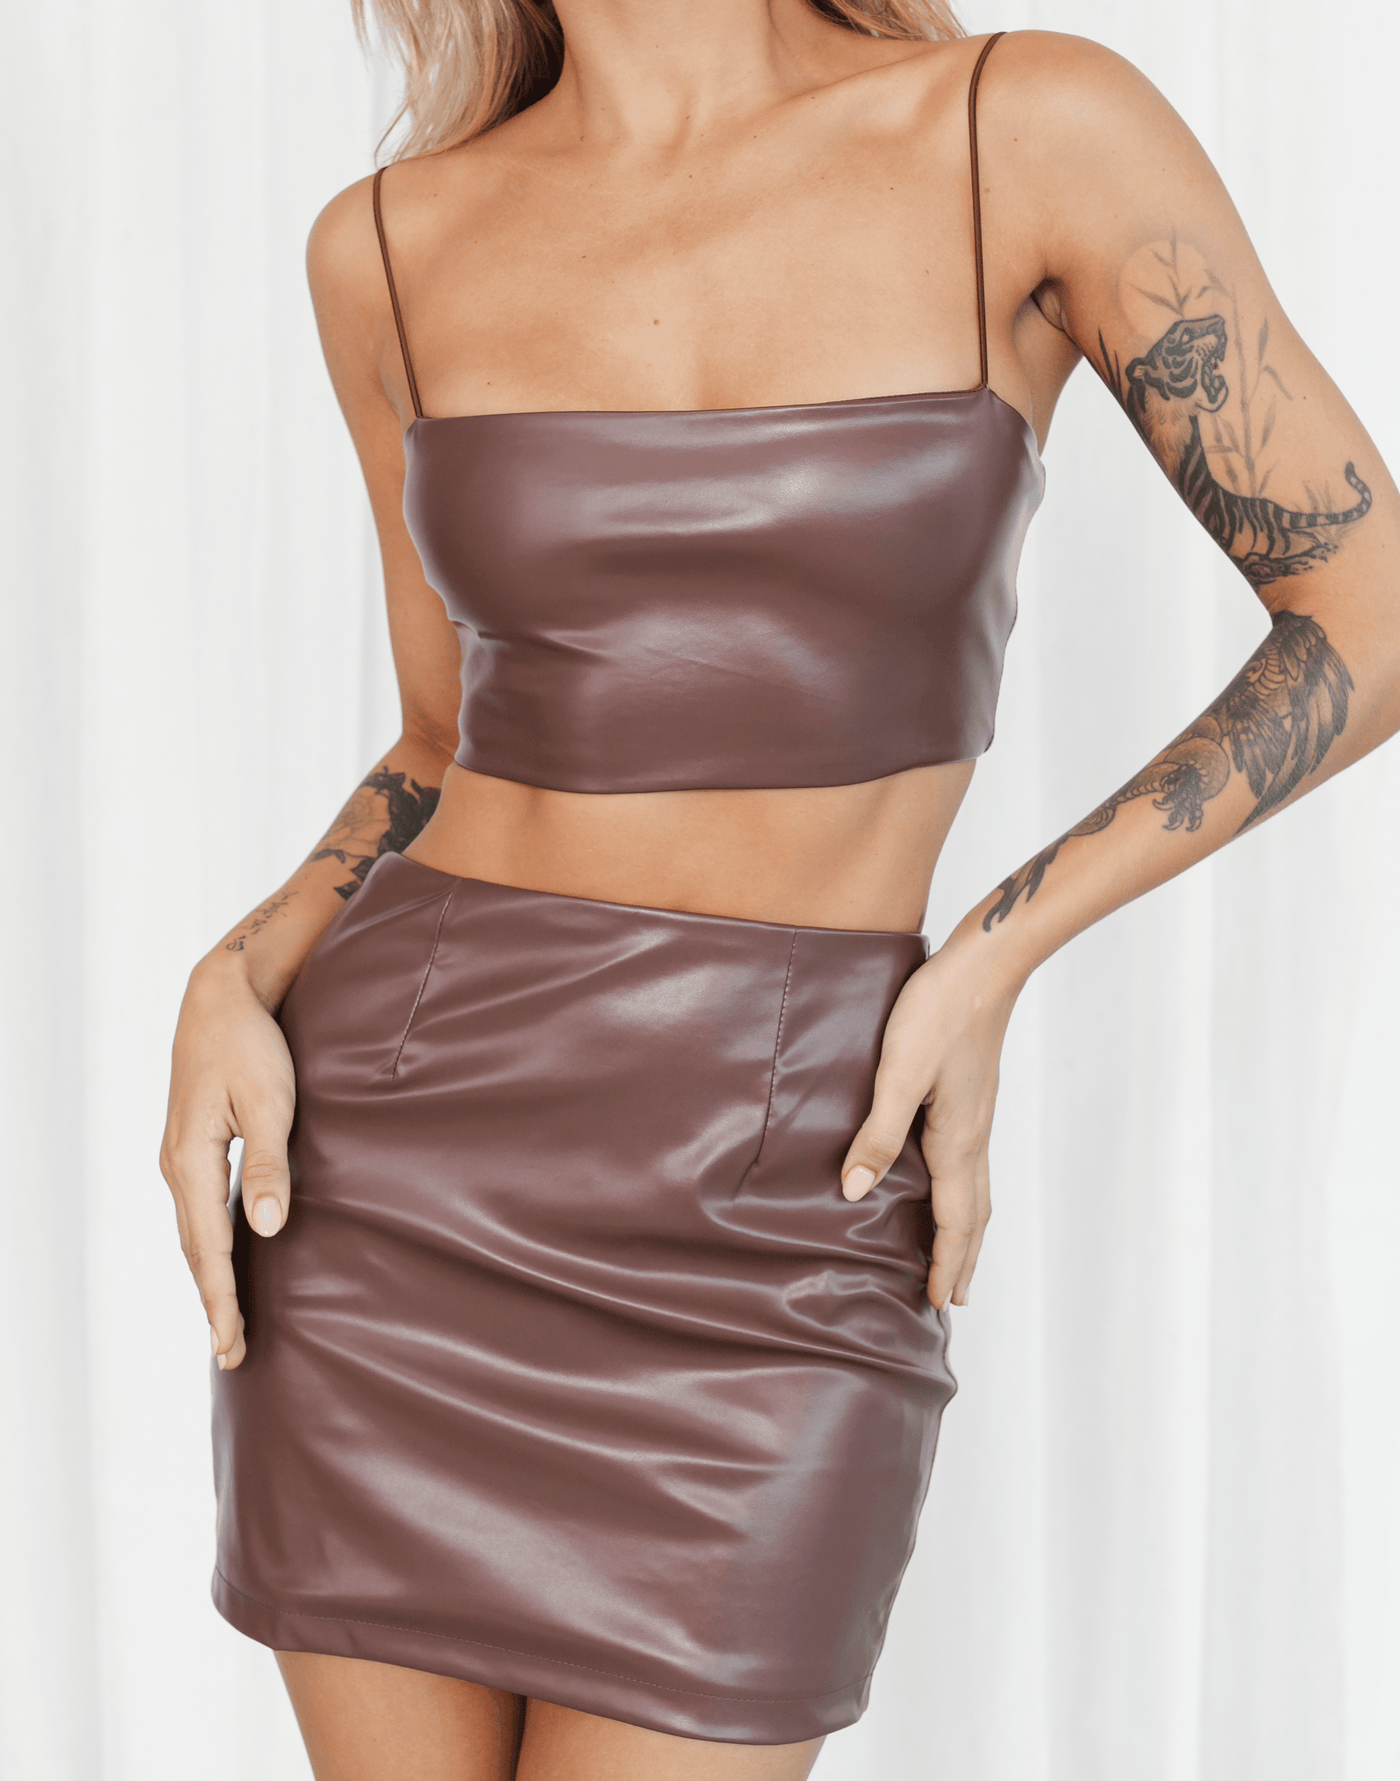 Chicago Crop Top (Brown) - Faux Leather Crop Top - Women's Top - Charcoal Clothing